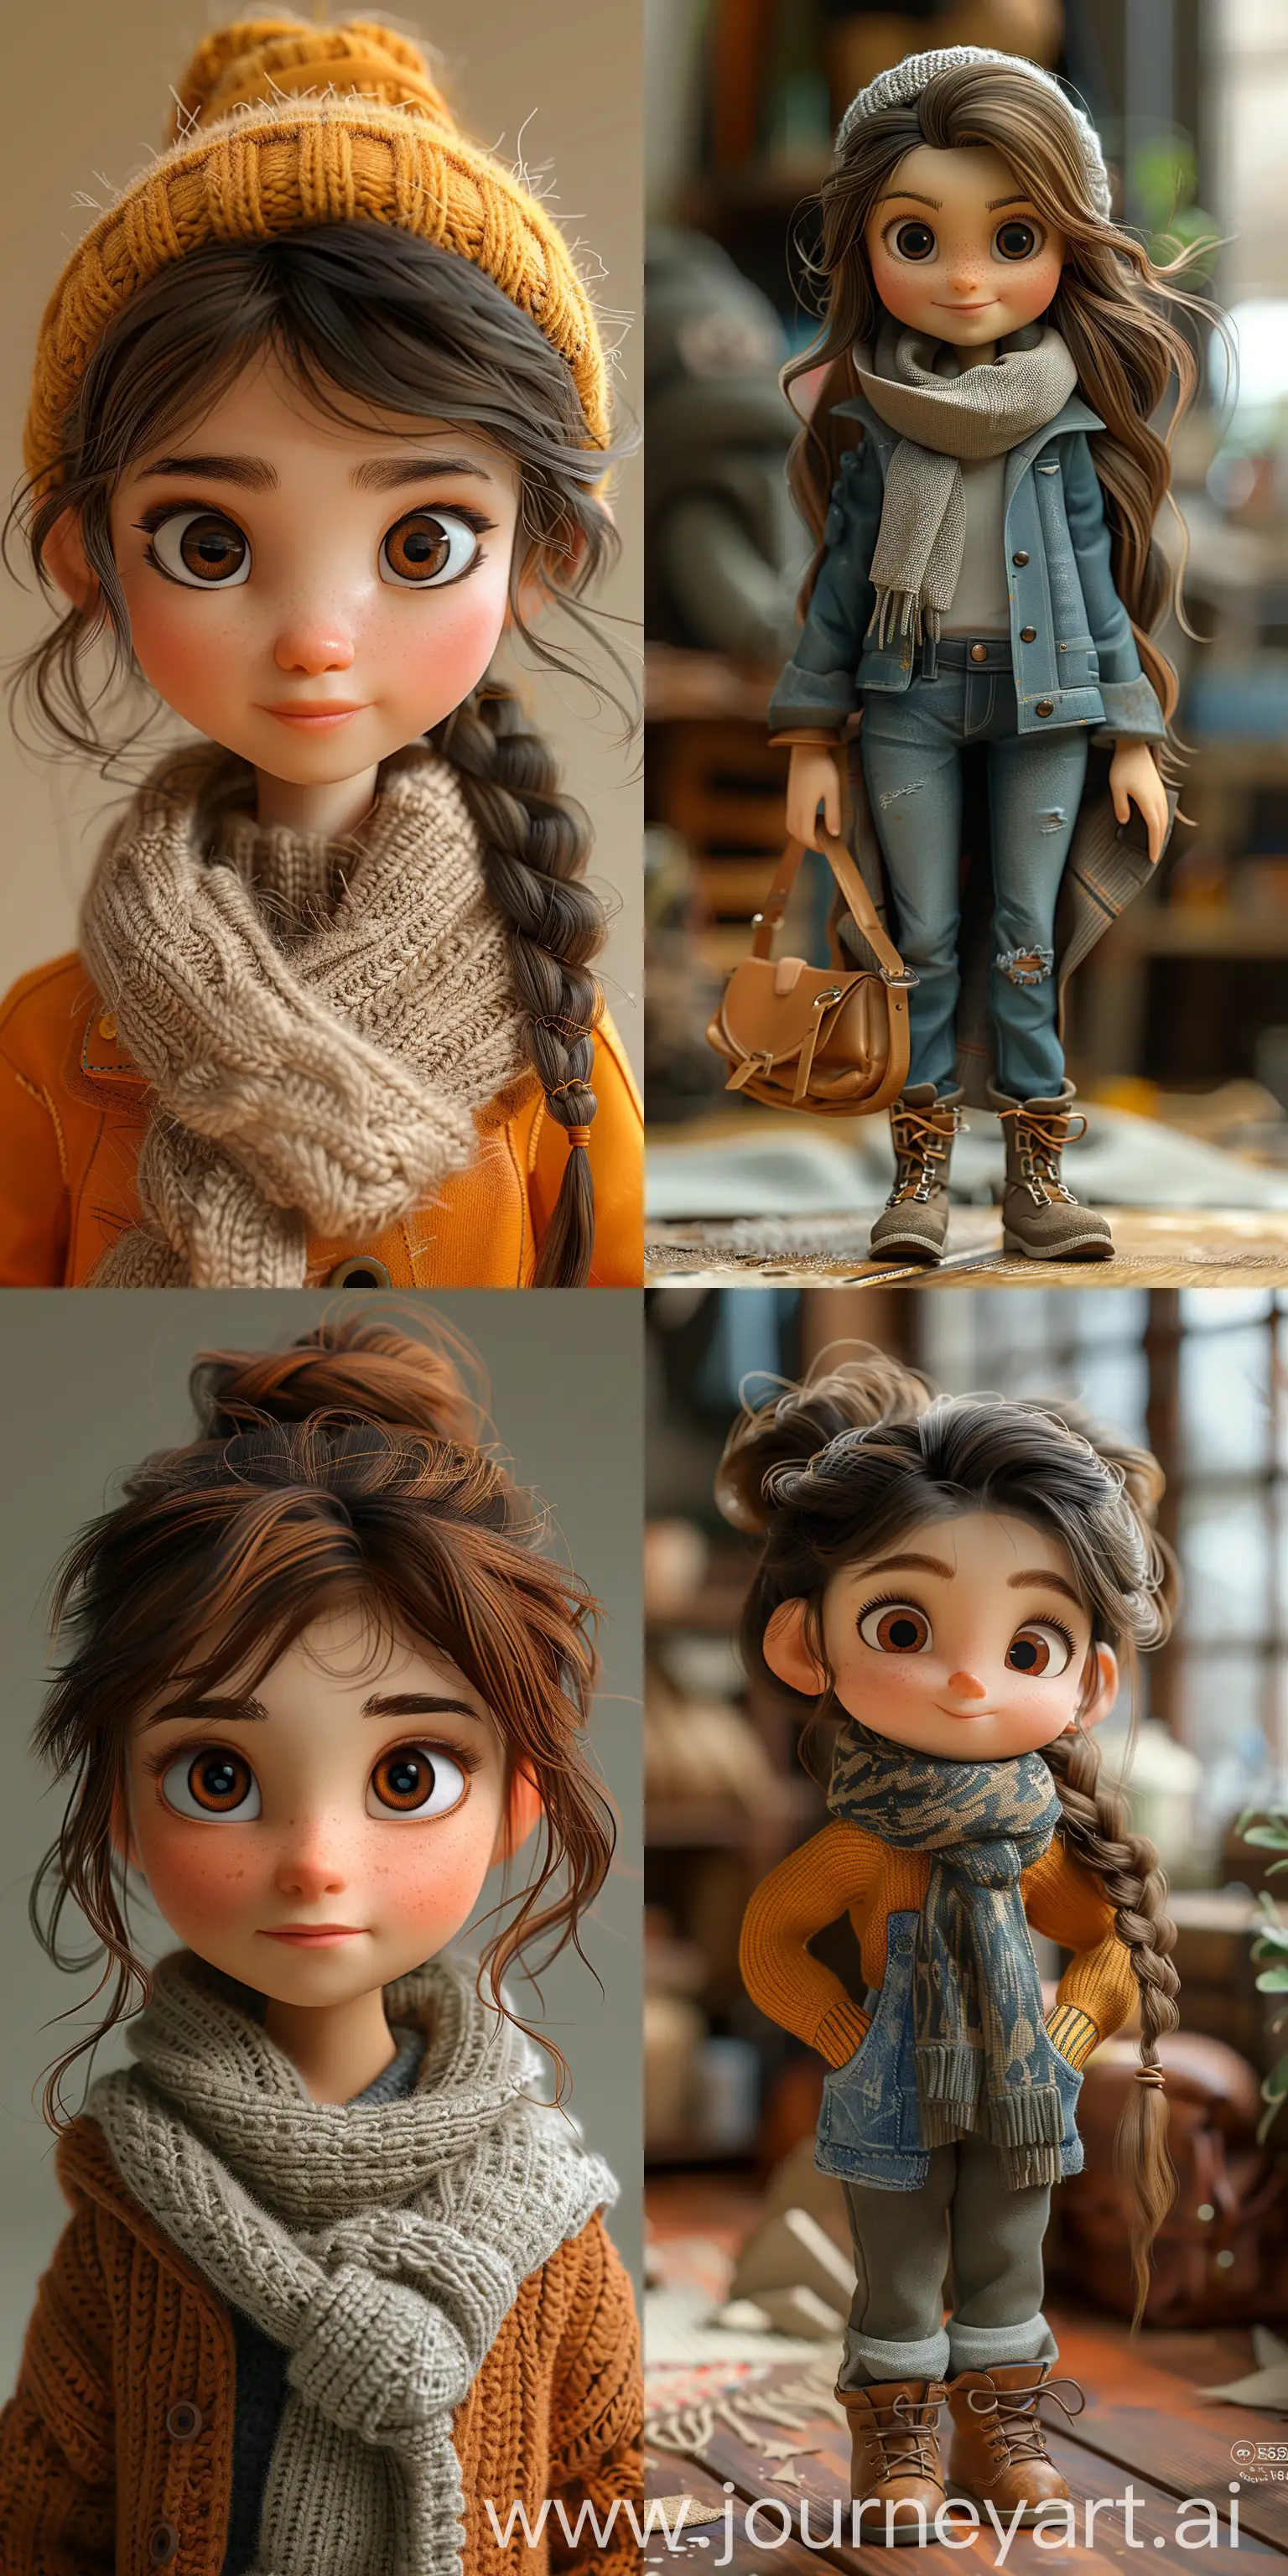 Charming-3D-PixarStyle-Image-of-a-Cute-Girl